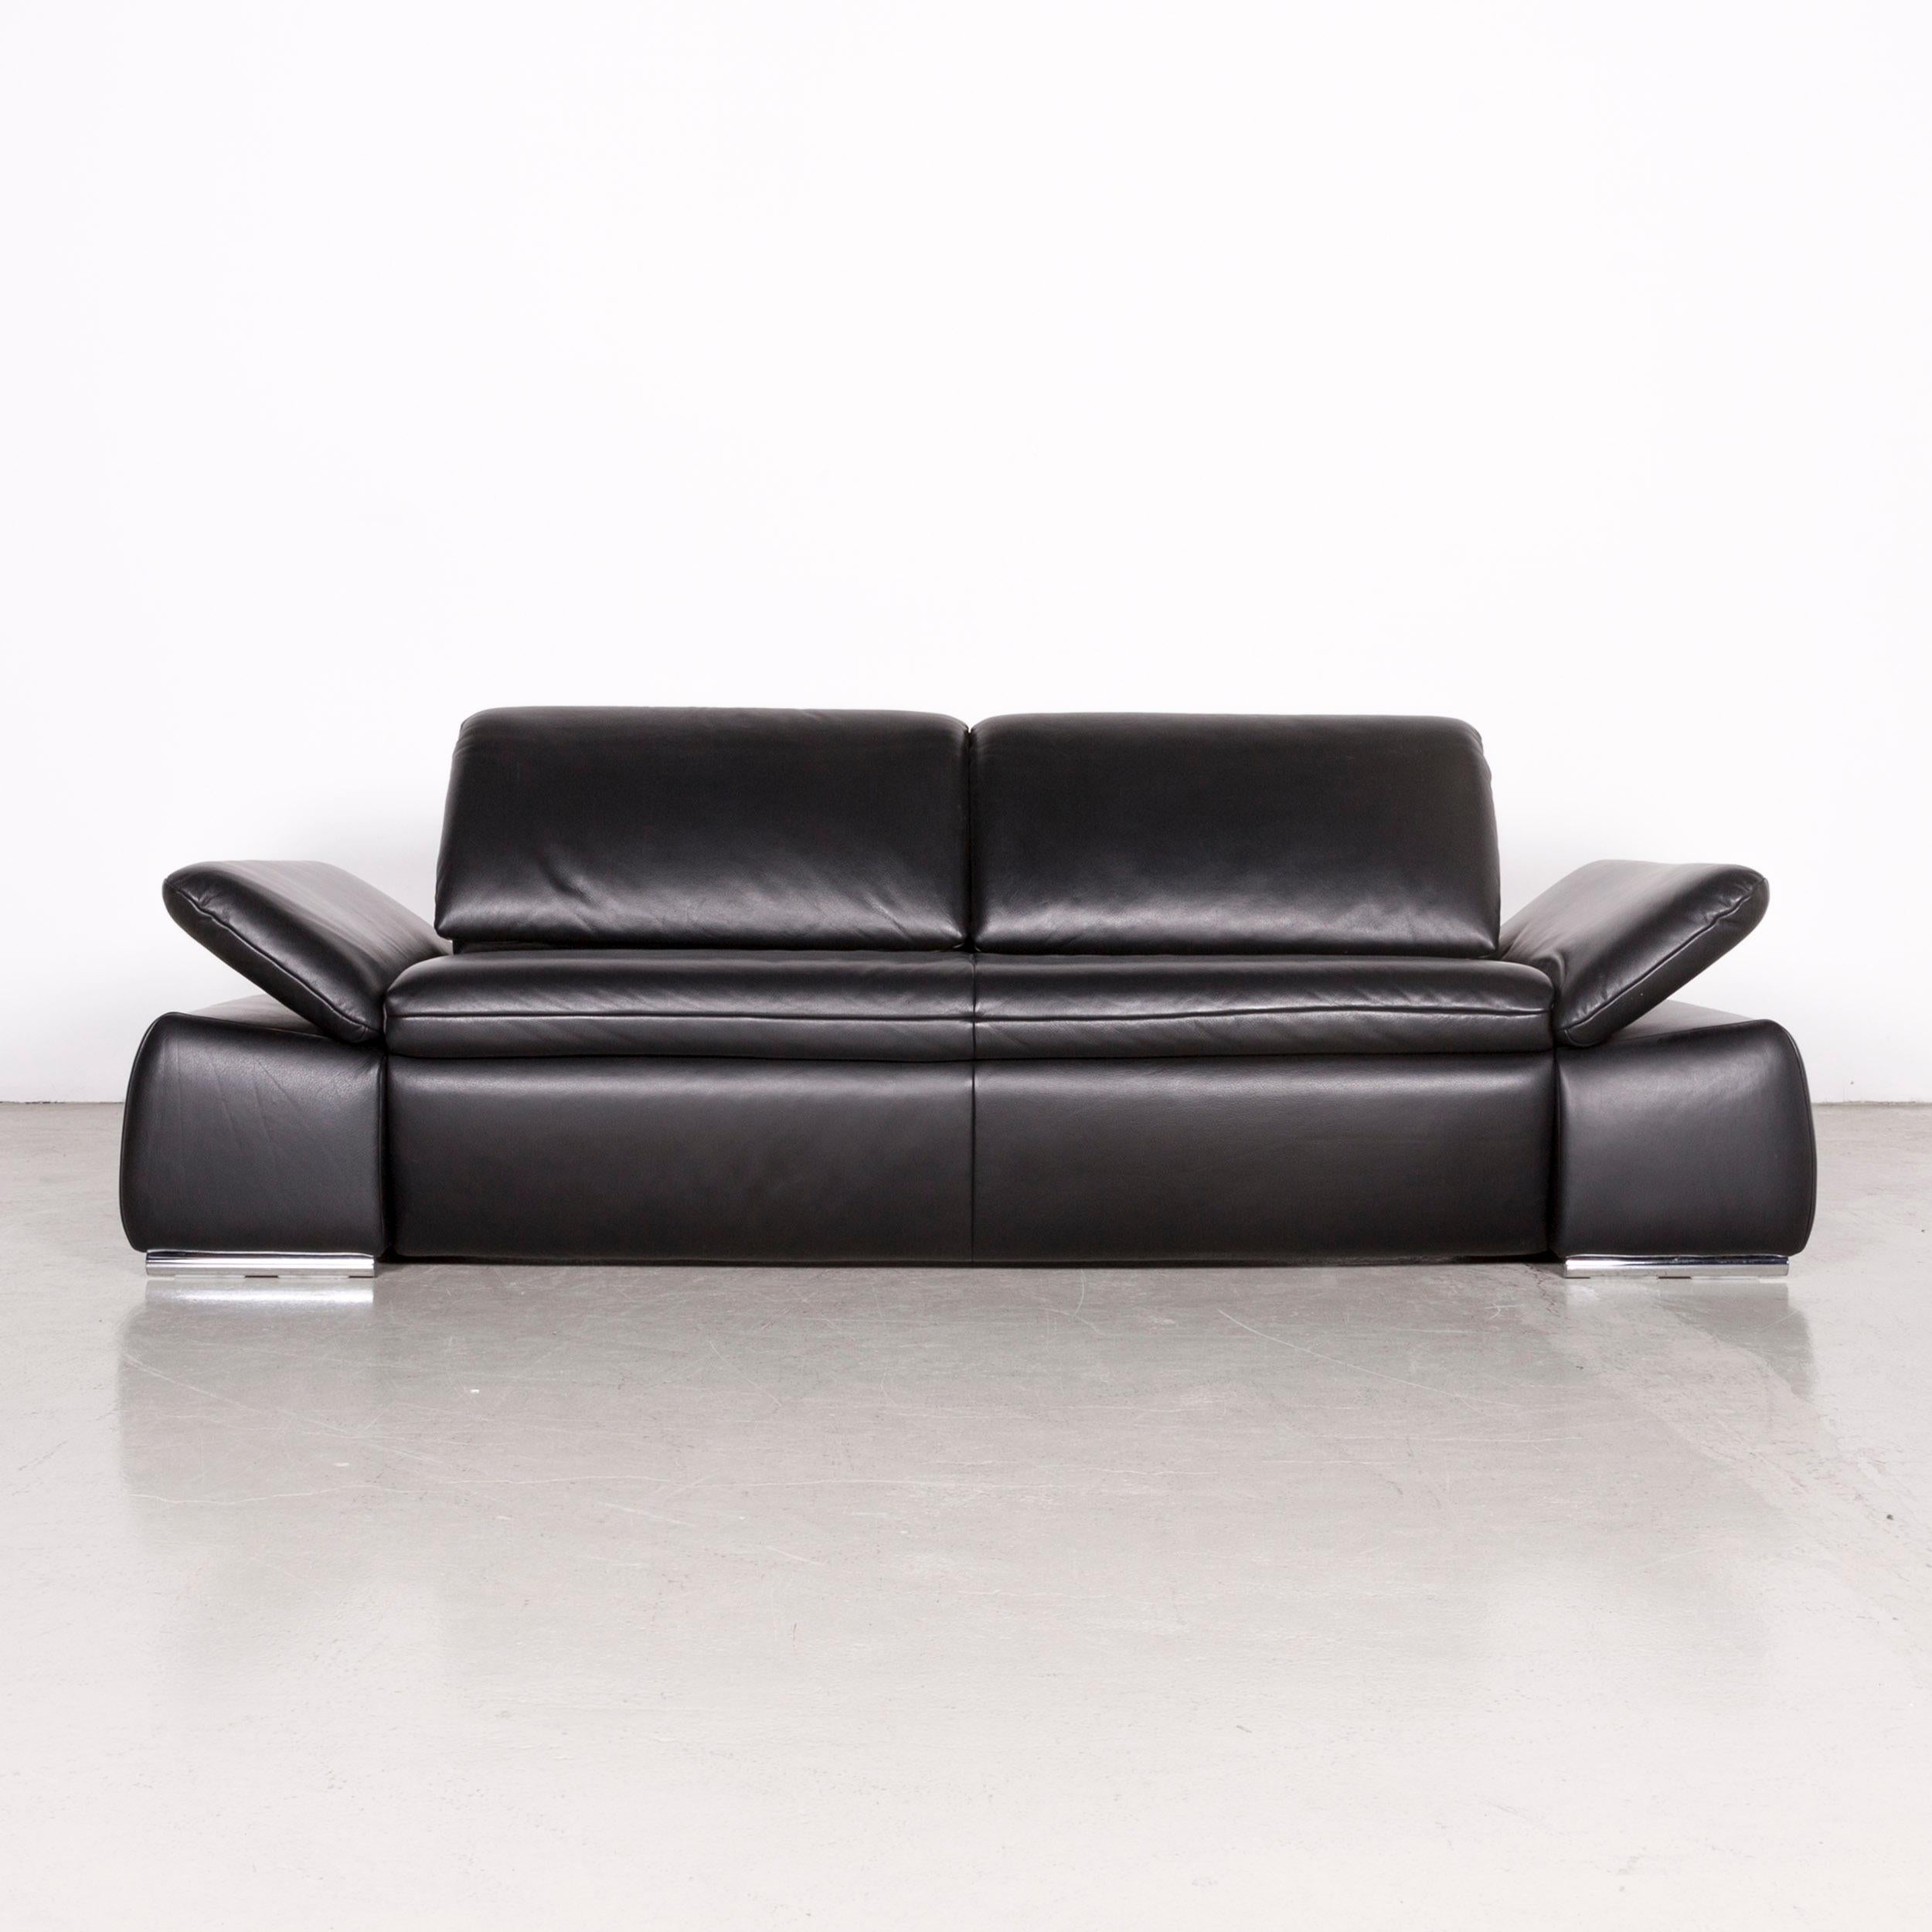 Koinor Evento Designer Sofa Black Three-Seat Leather Couch Electric Function For Sale 7